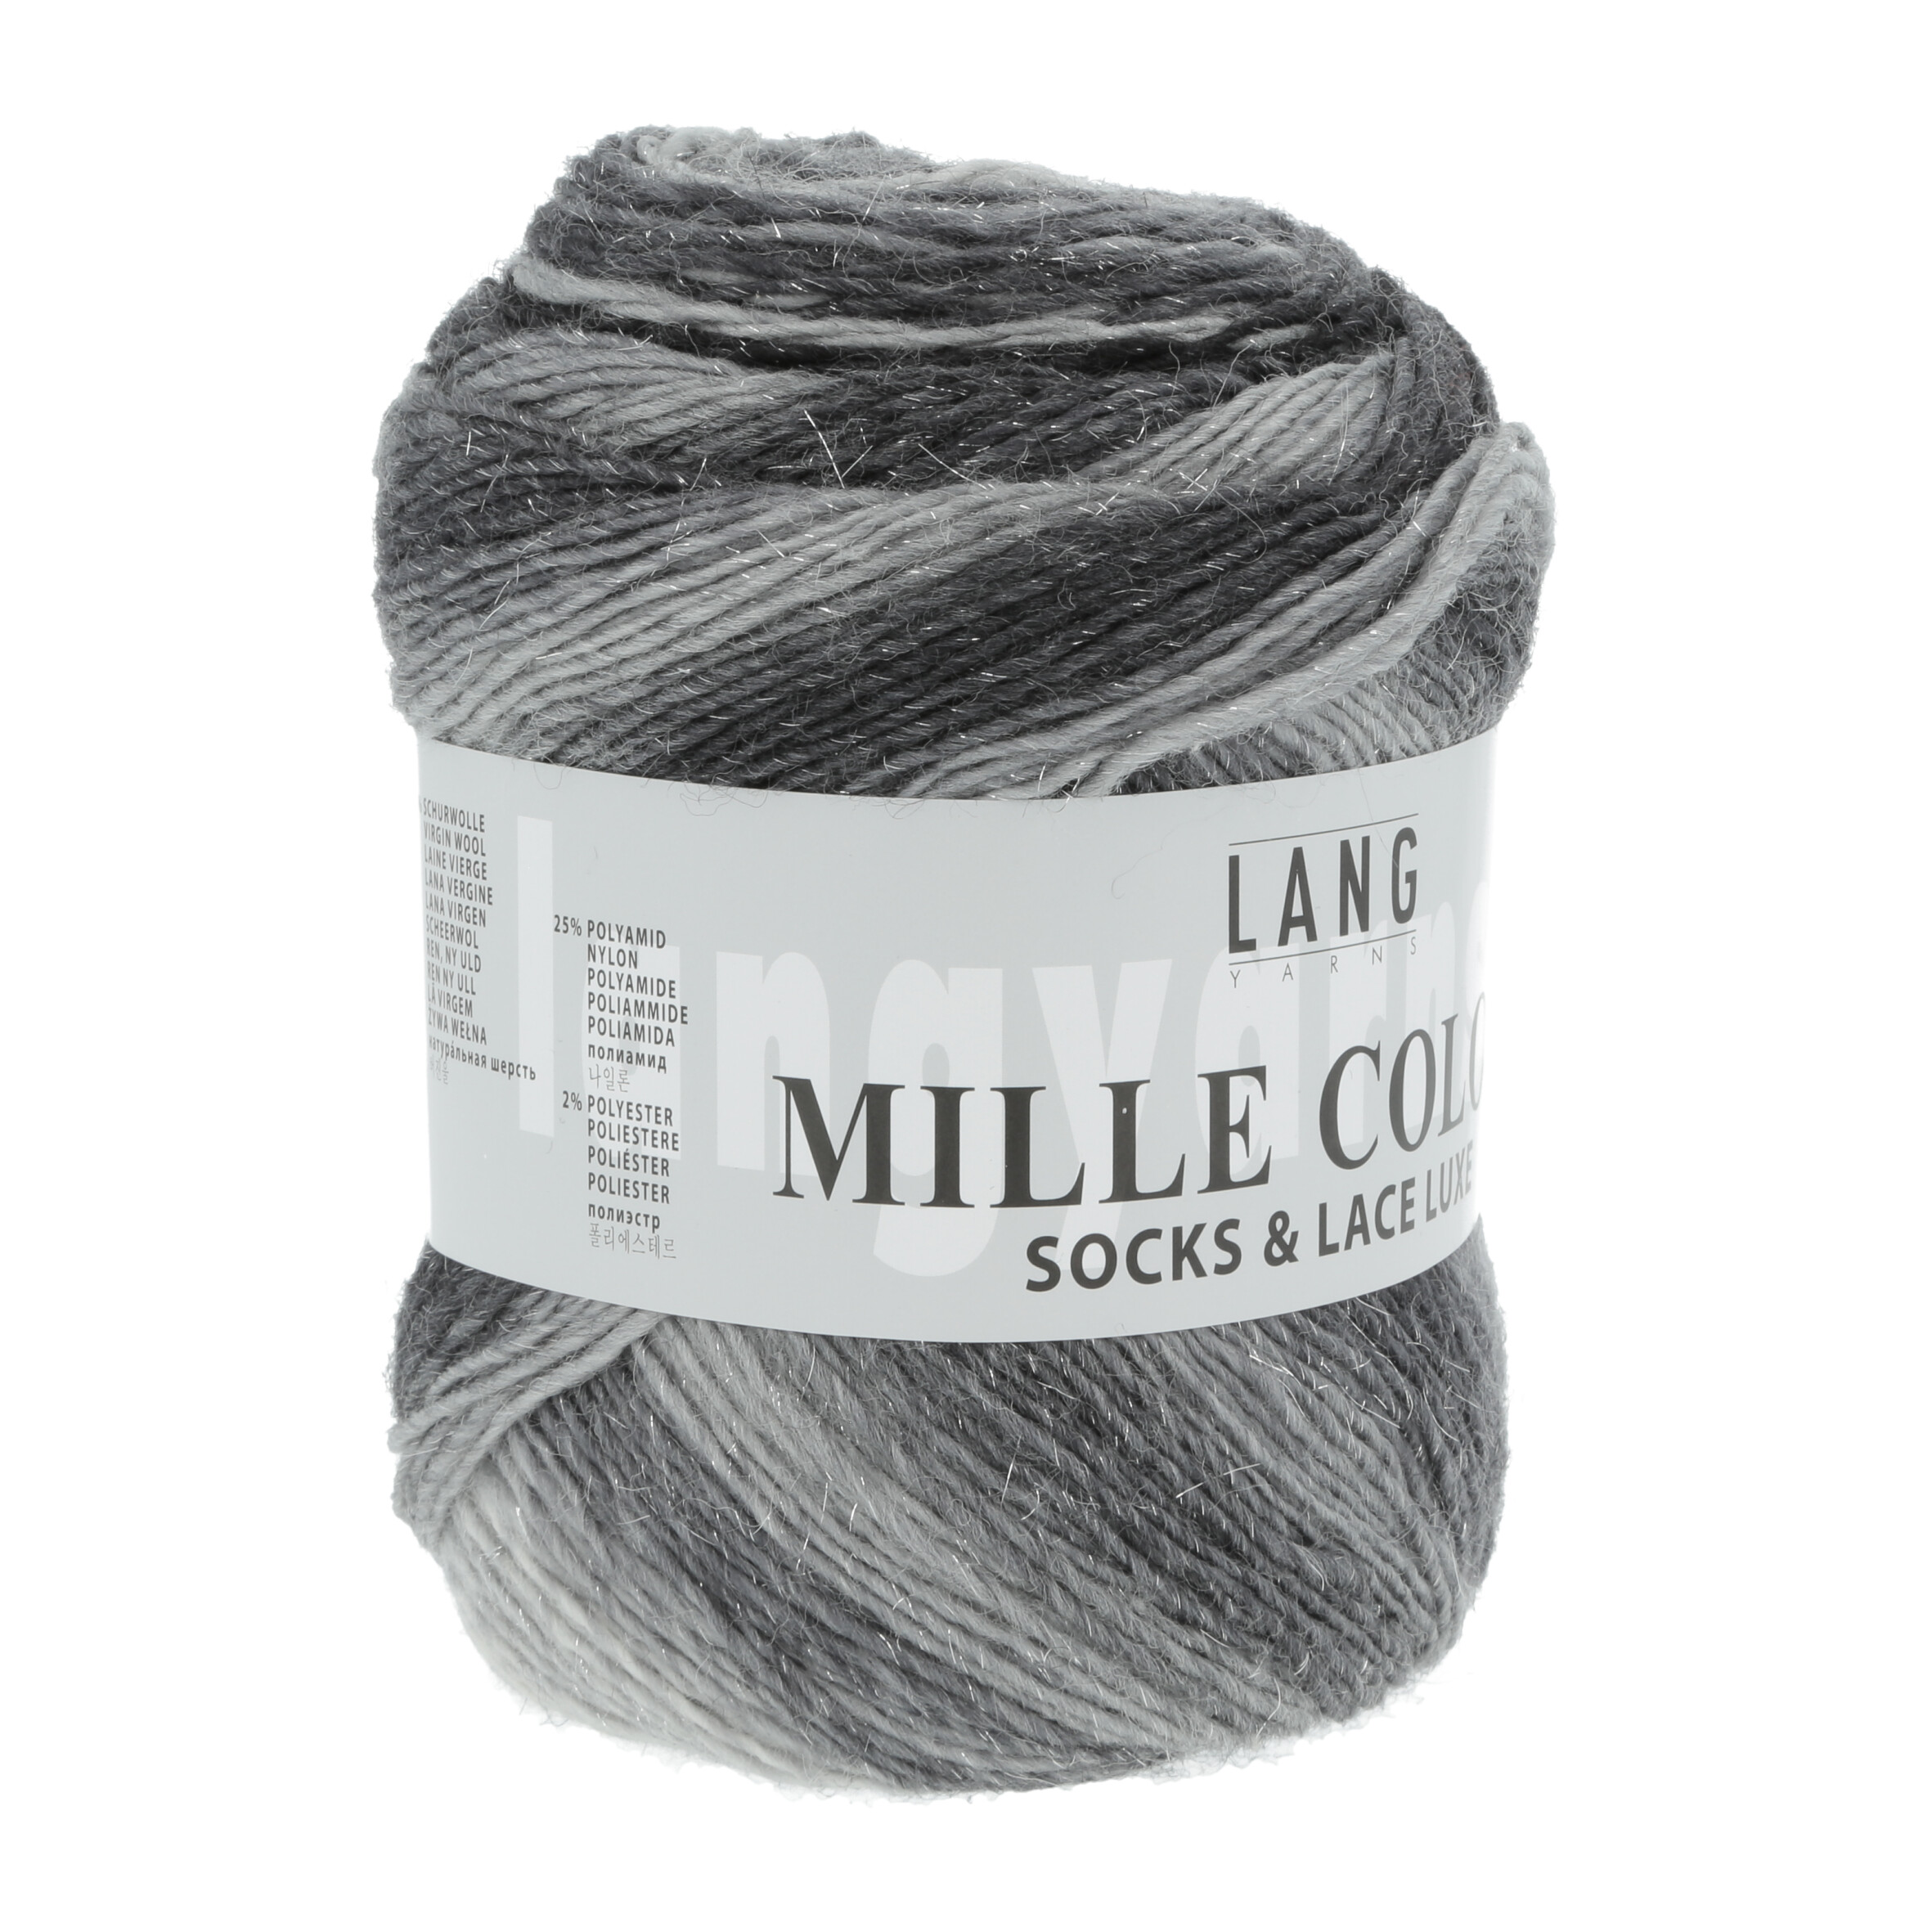 LANG Mille Colori Socks & Lace Luxe 003 hellgrau/anthrazit-silber